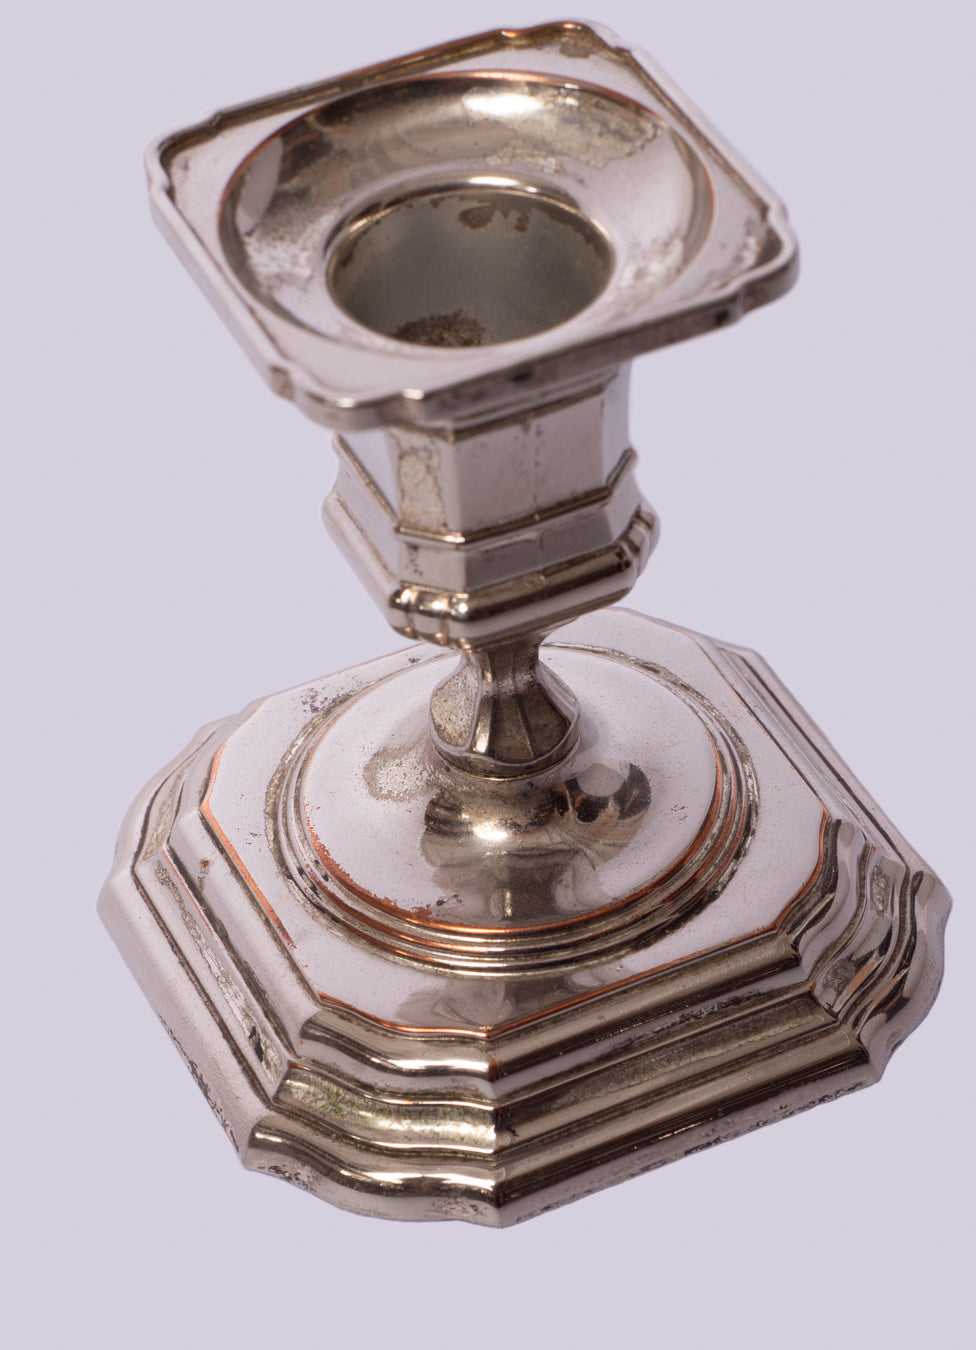 Set of 2 Vintage Silver-Plated Candle Holders